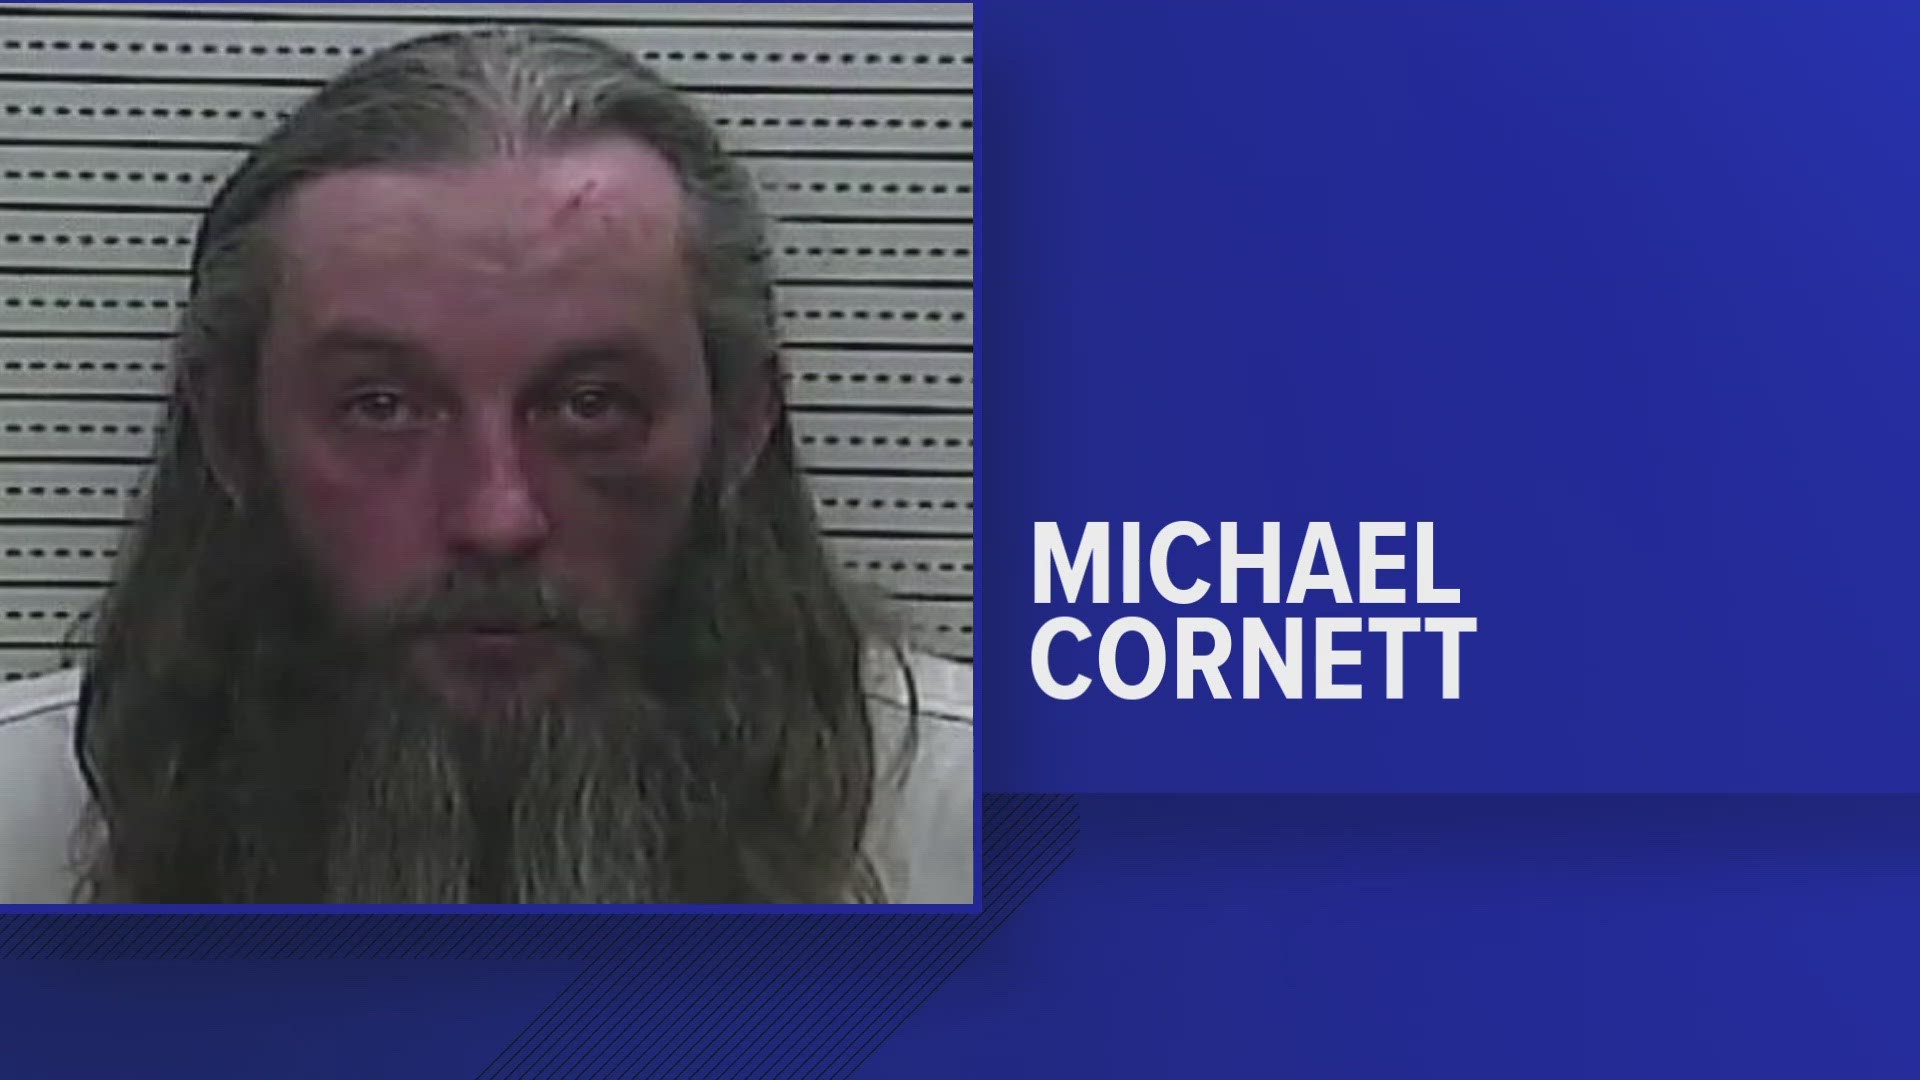 Michael Cornett was arrested soon after arriving at his home Thursday morning.